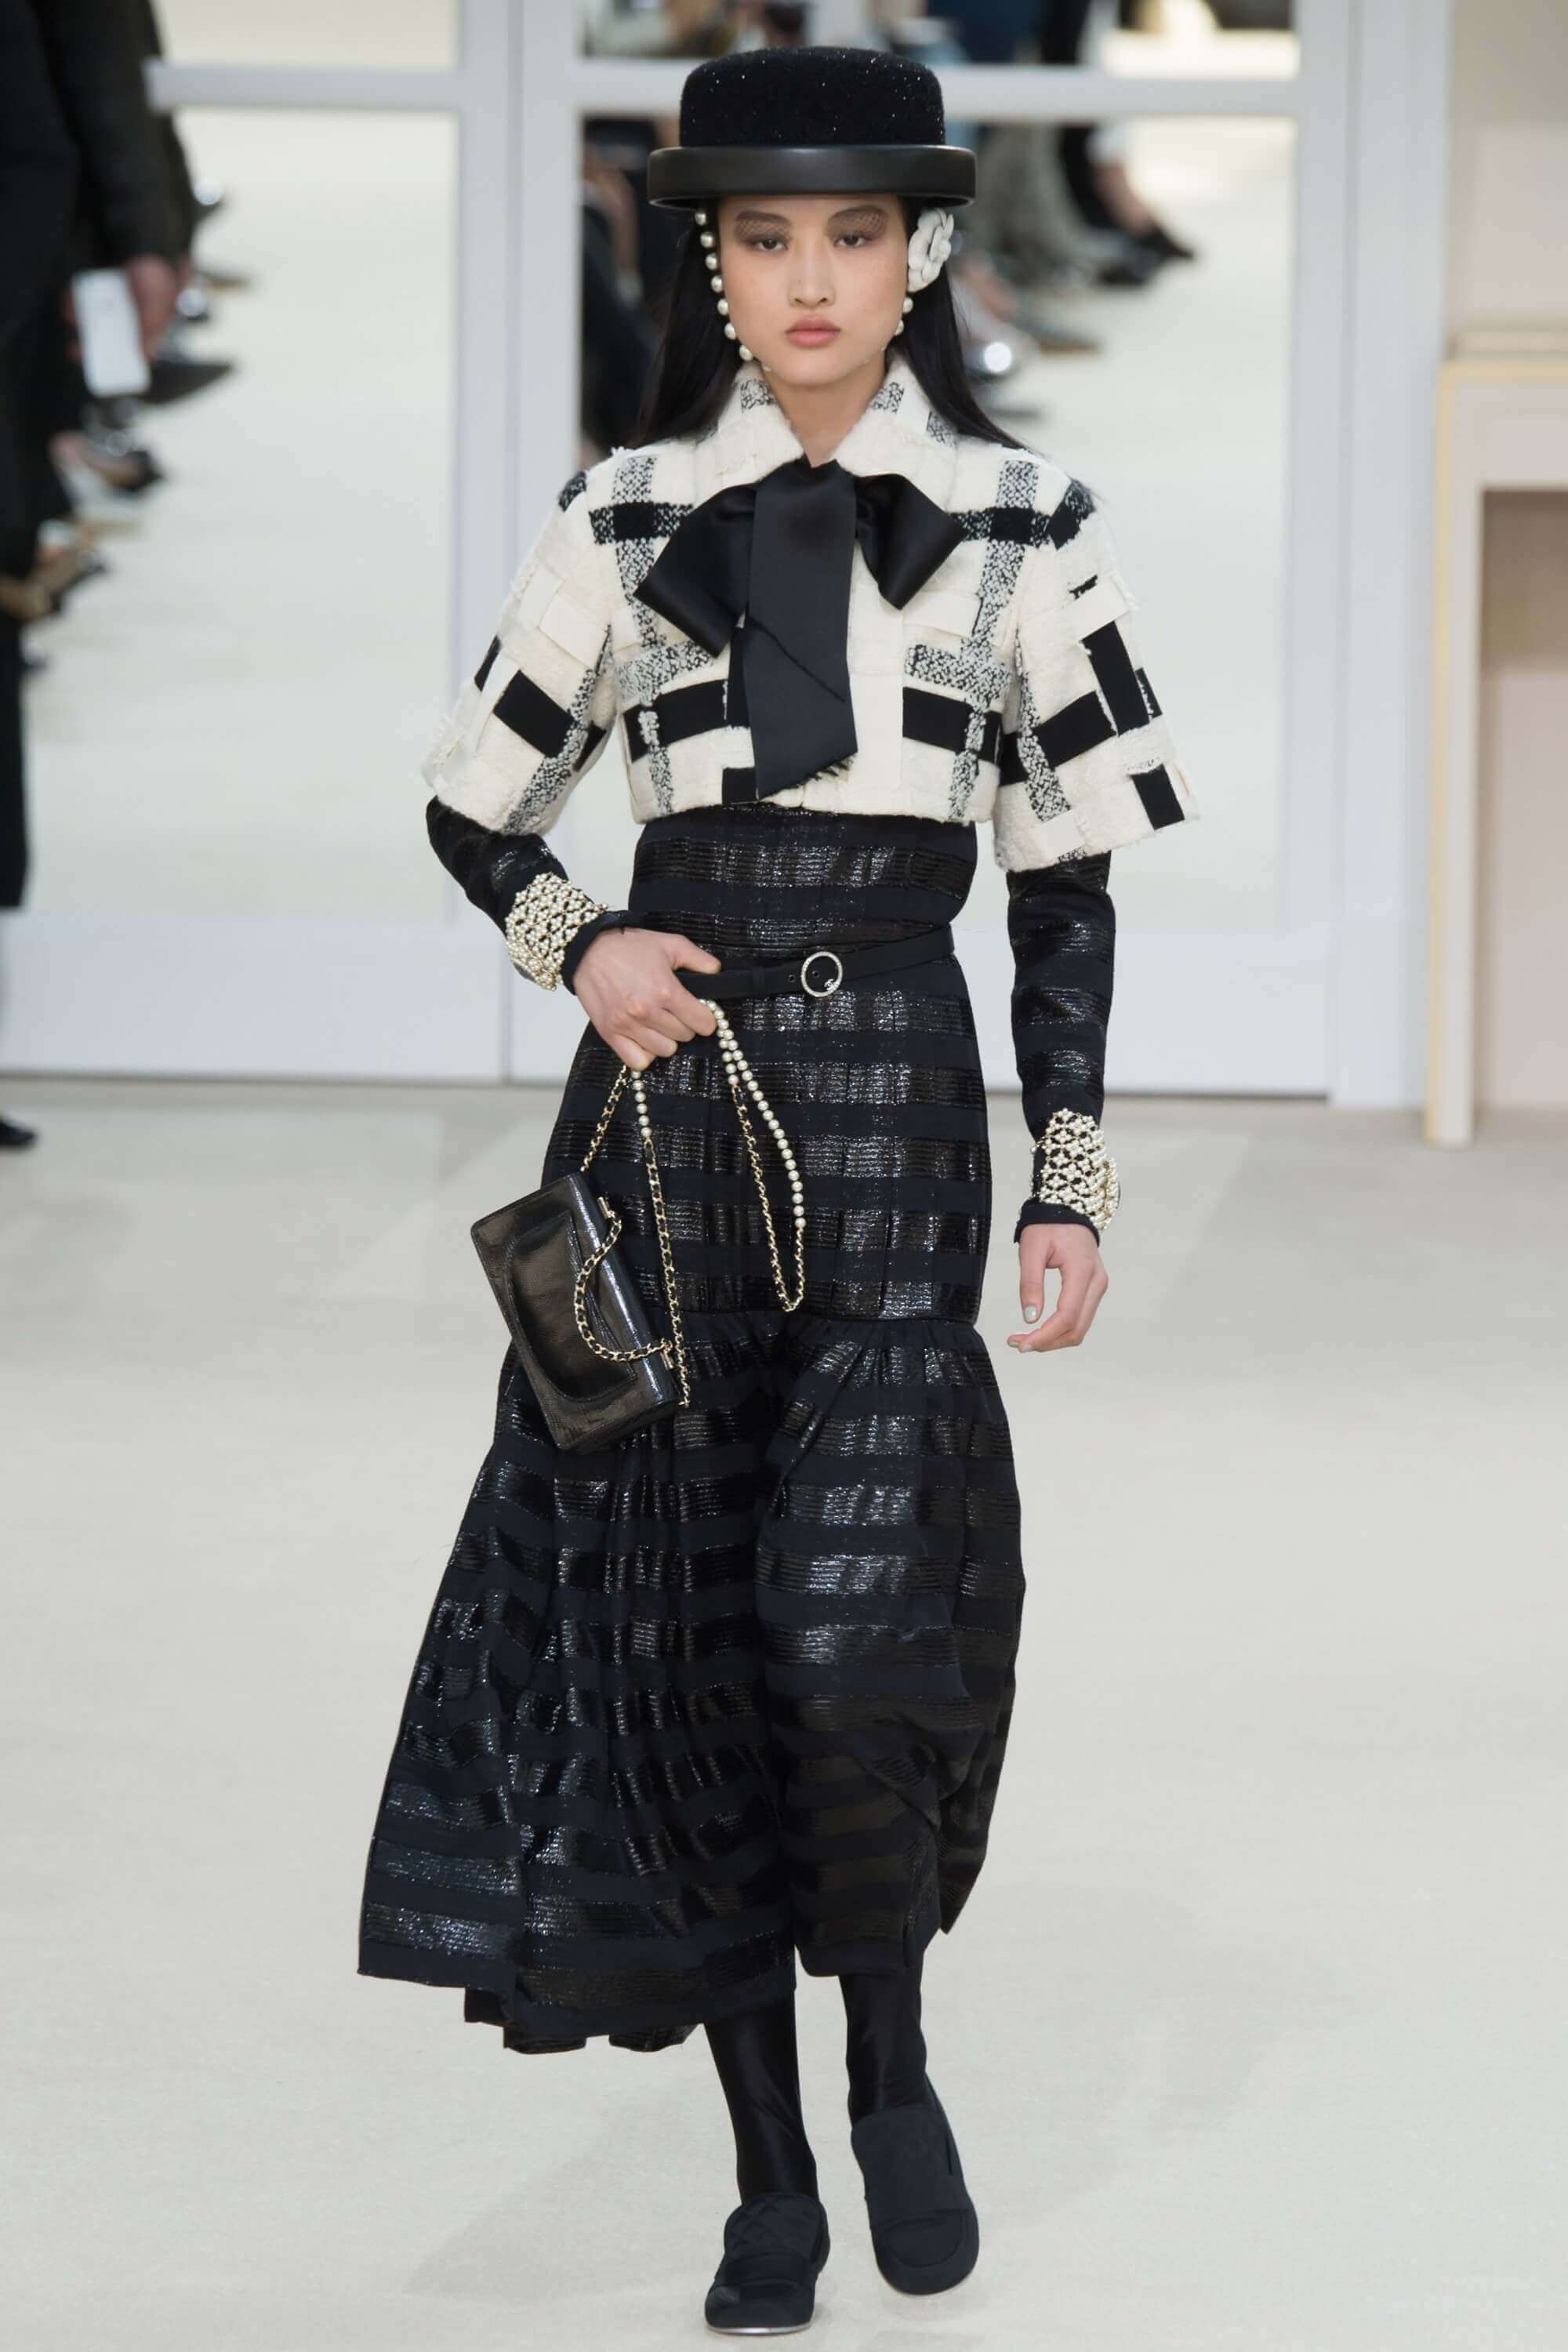 Bows trend at Chanel Ready to Wear fall 2016 fashion show